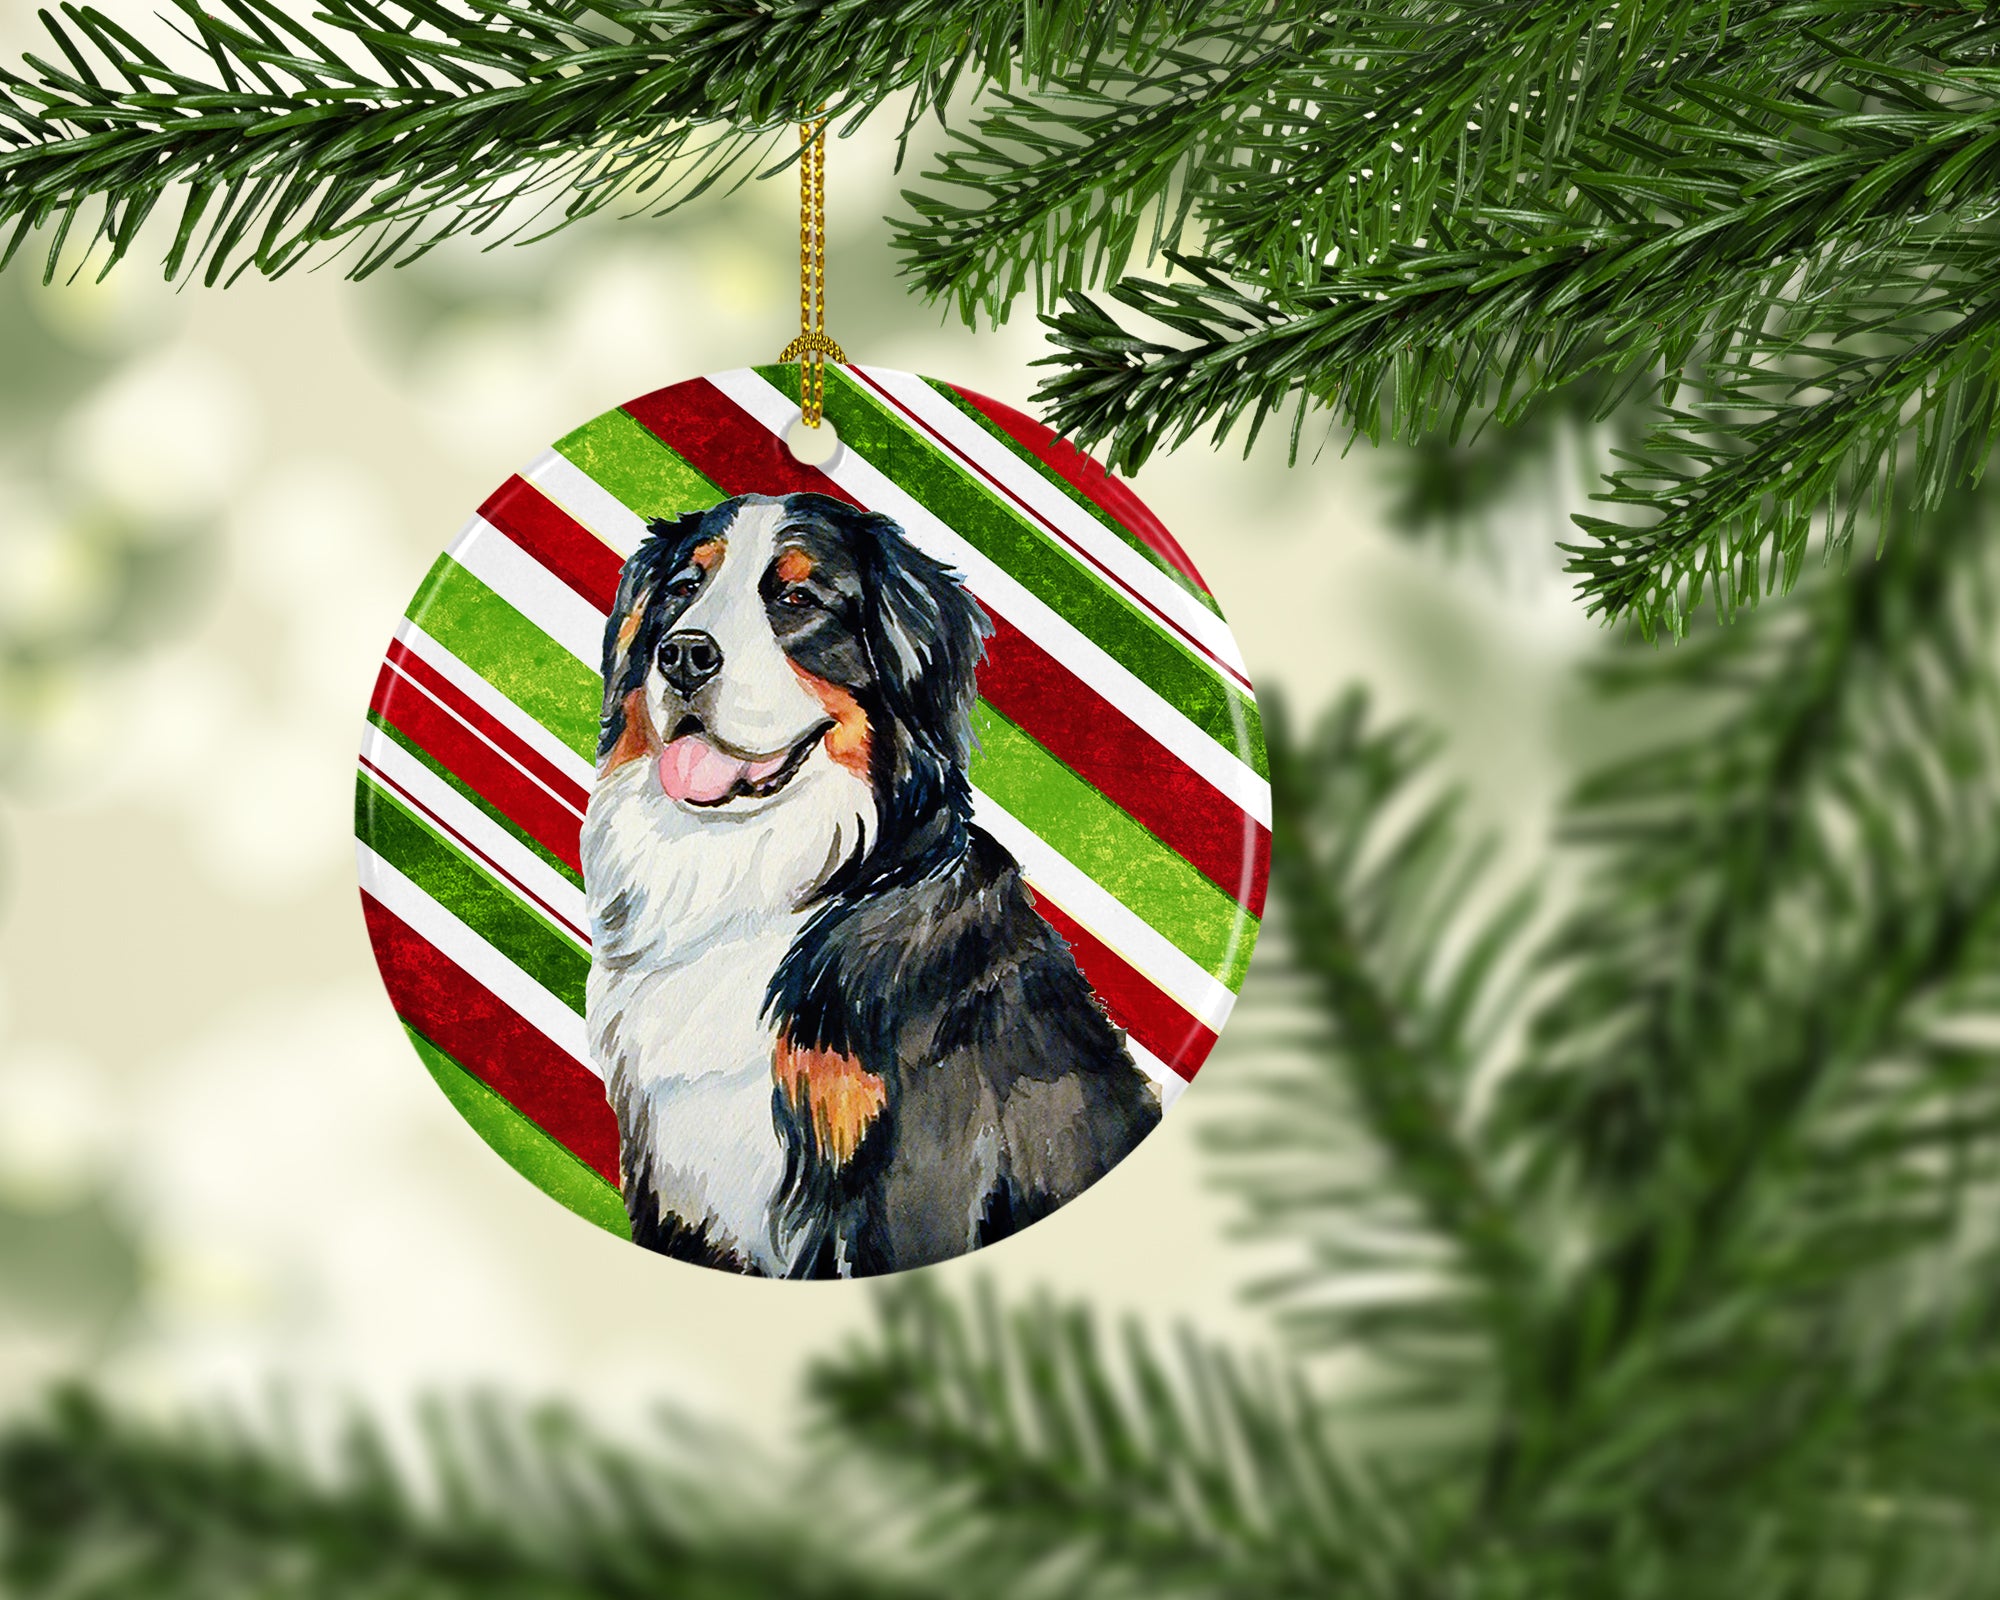 Bernese Mountain Dog Candy Cane Holiday Christmas Ceramic Ornament LH9244 - the-store.com